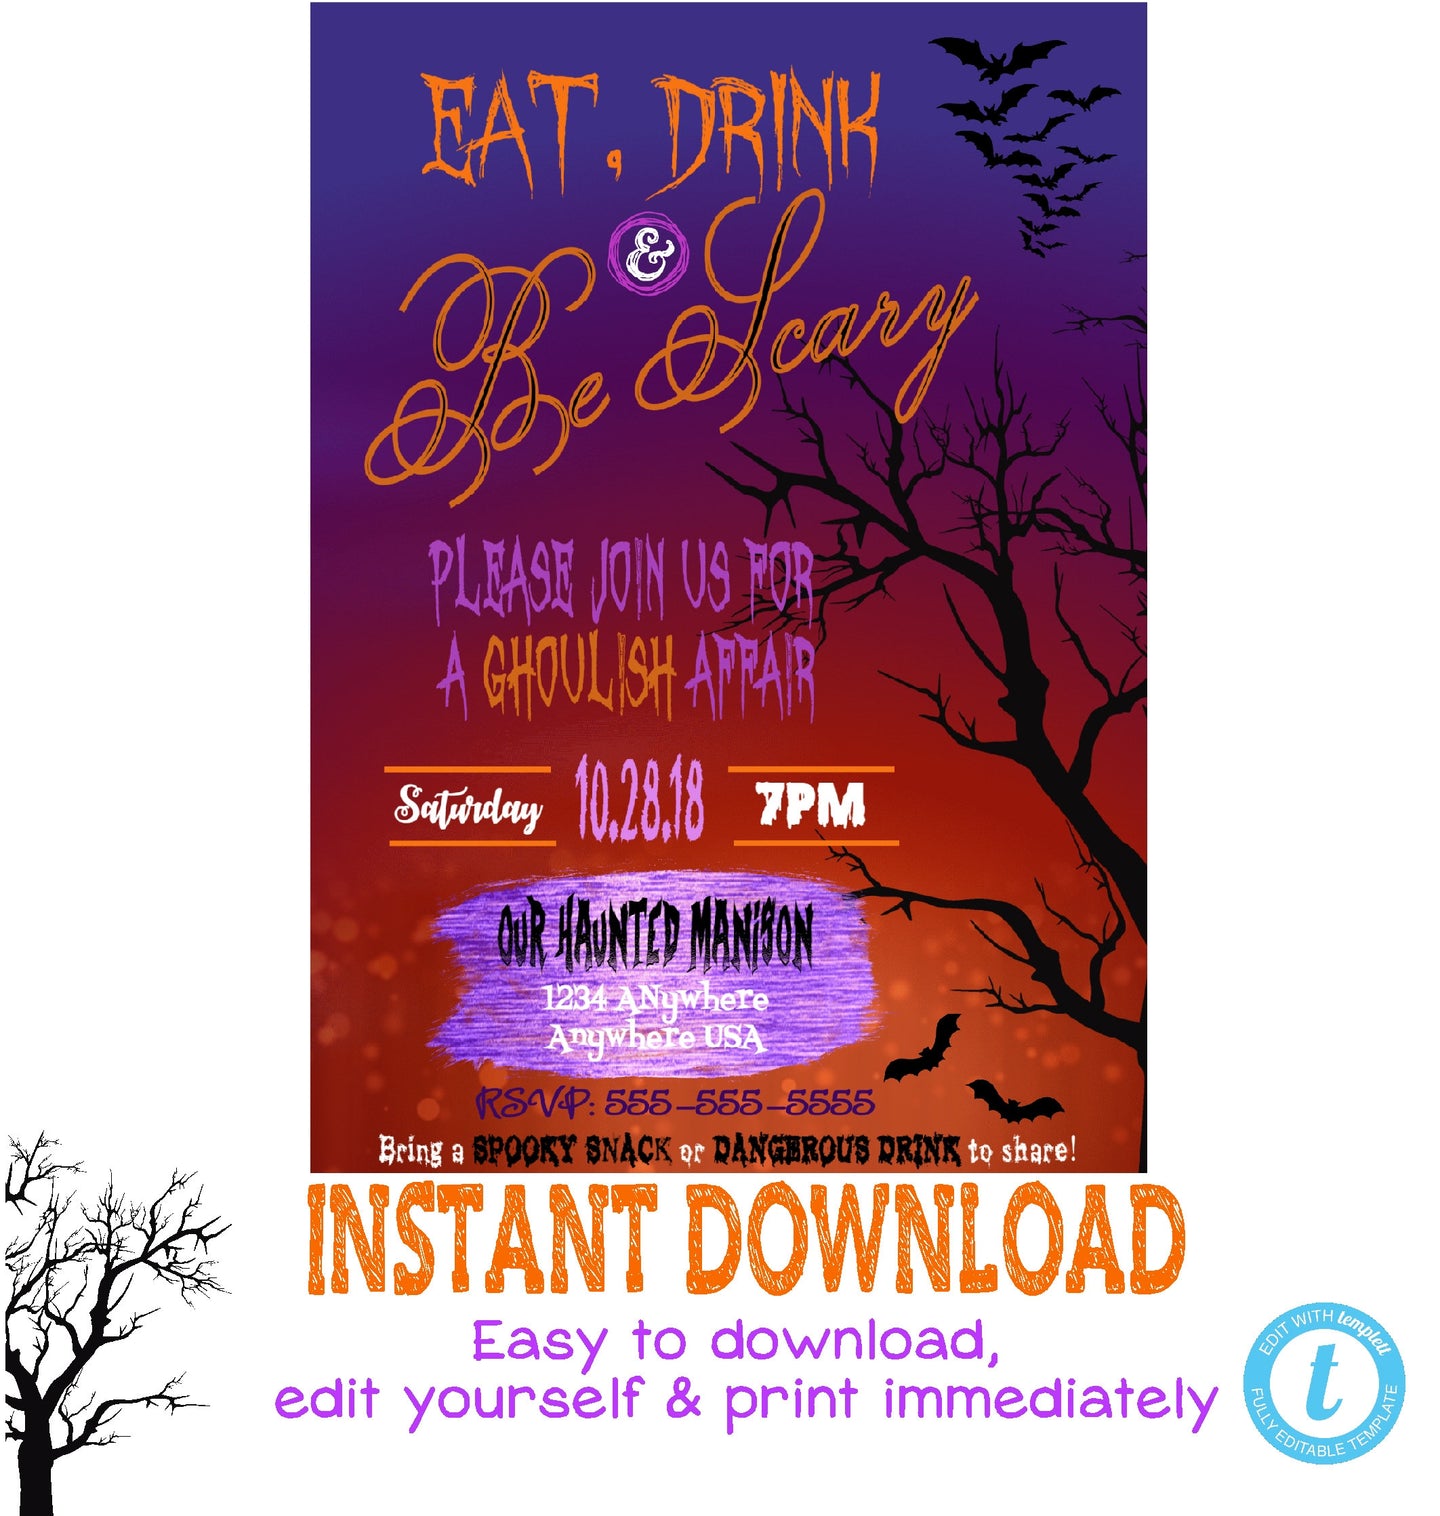 Halloween Party Invitation, Spooky Halloween, EAT DRINK be SCARY, Haunted House invite, Masquerade Costume Party You edit digital